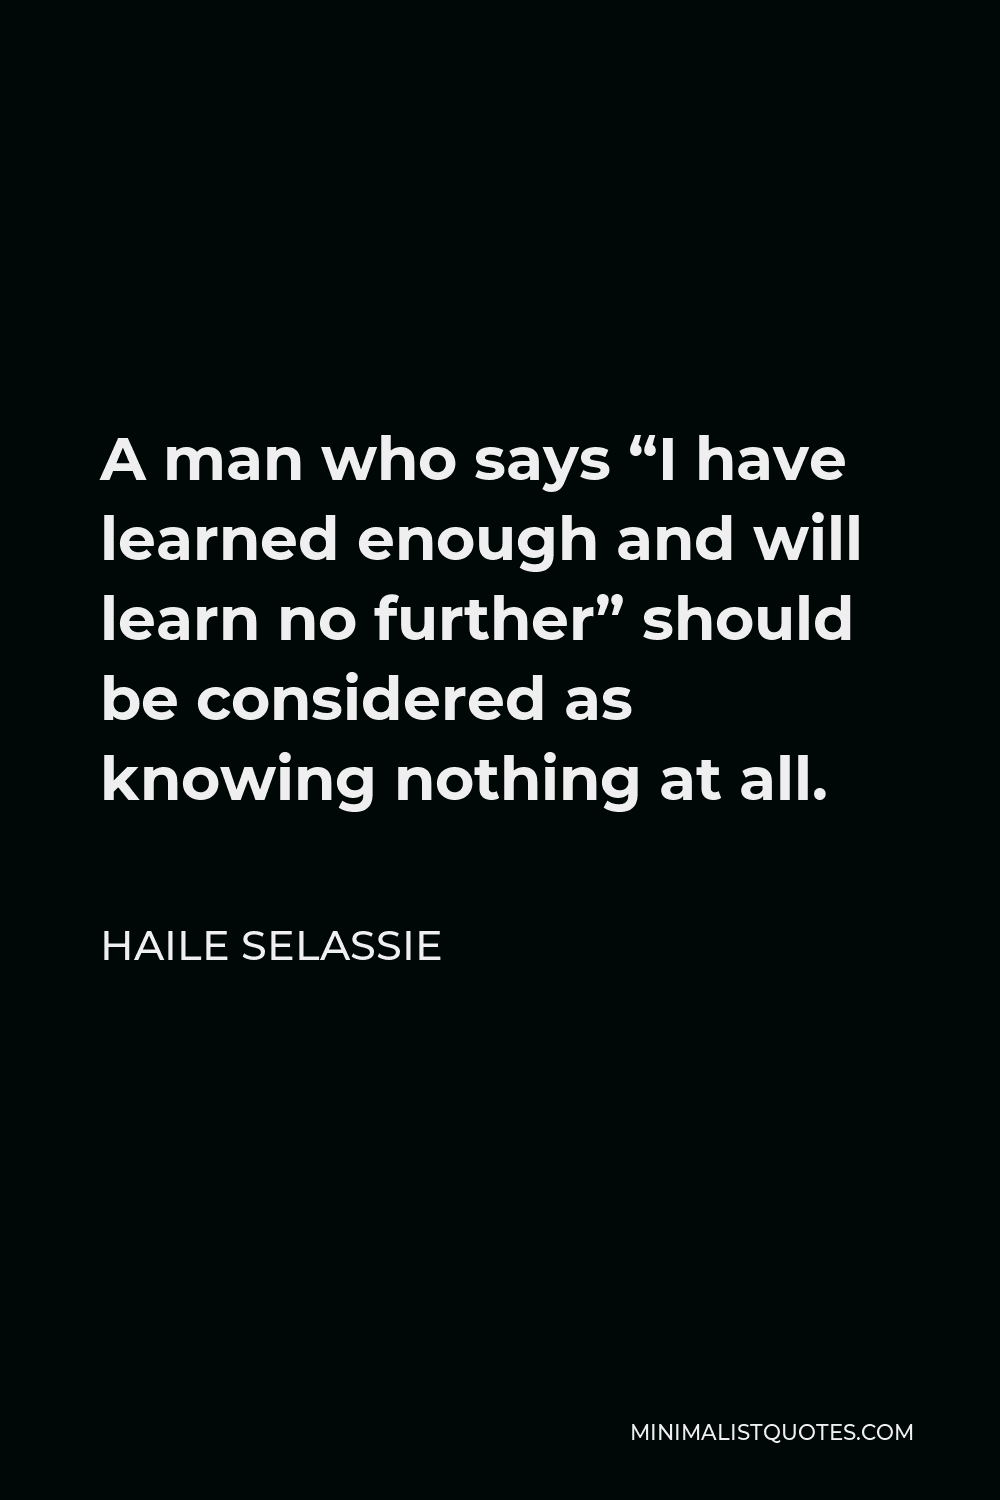 Haile Selassie Quote - A man who says “I have learned enough and will learn no further” should be considered as knowing nothing at all.